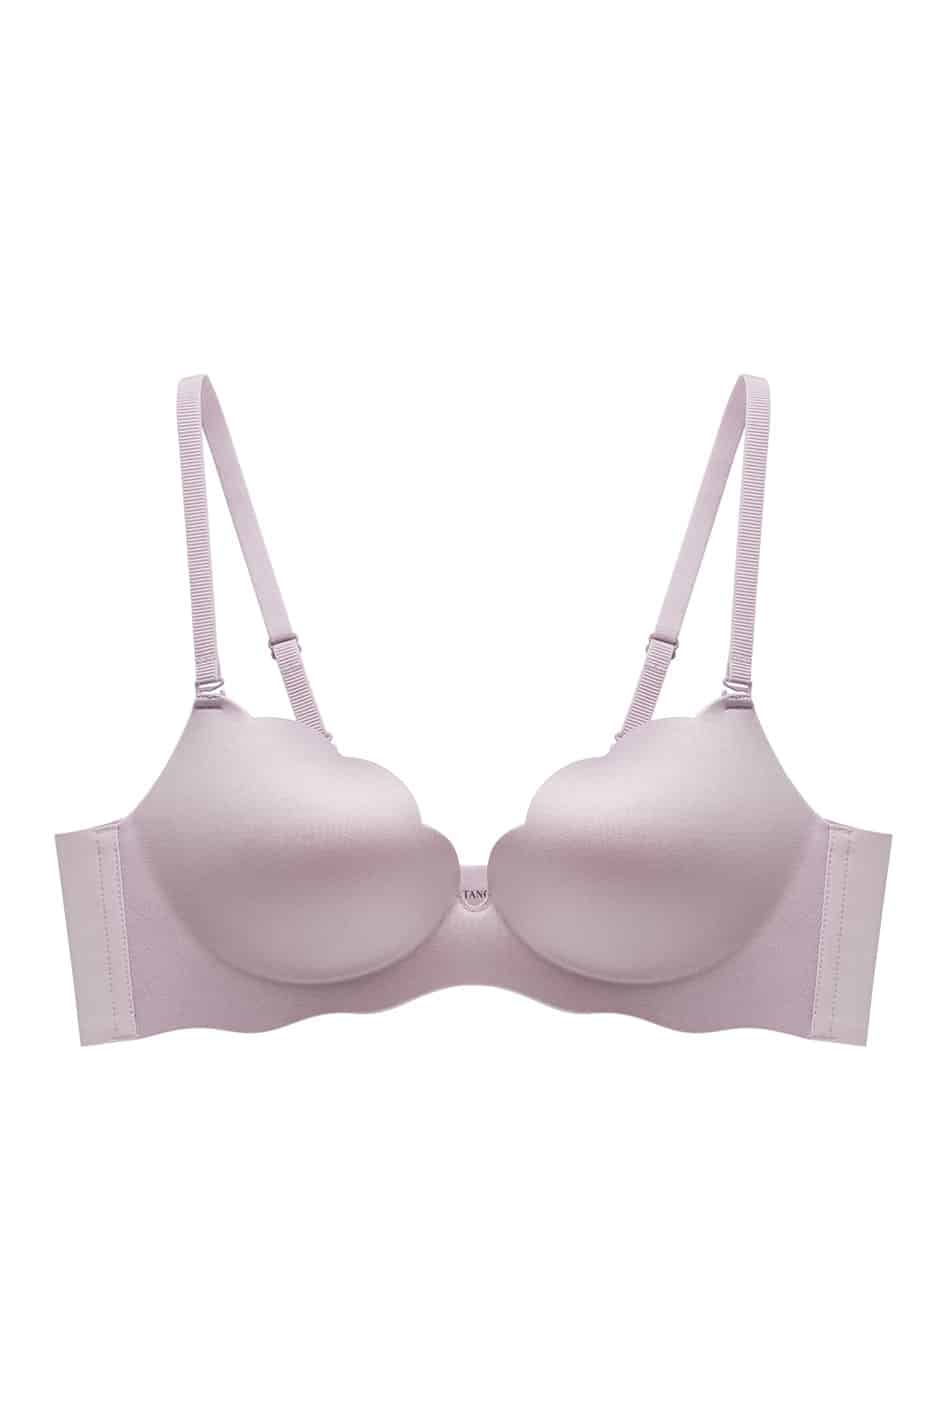  XMSM Mother's Comfort Wireless Bras for Push Up Small